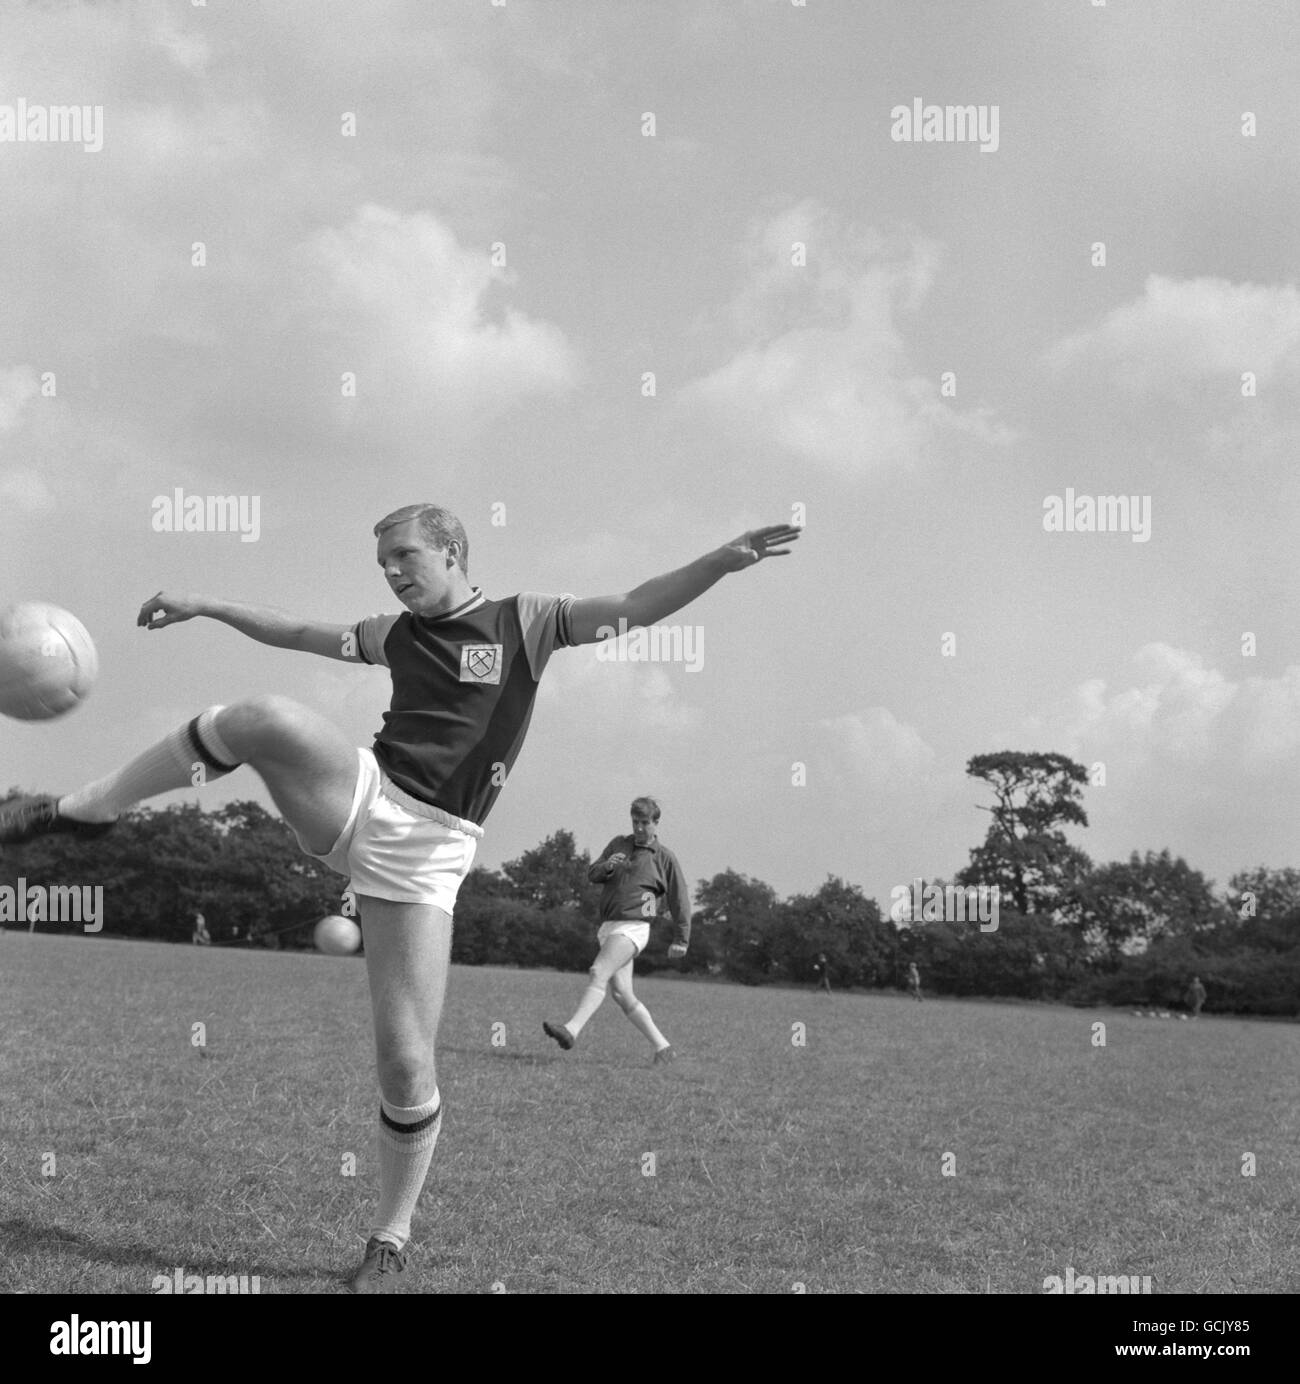 Soccer - League Division One - West Ham United Pre-Season Training - Grange Farm. Bobby Moore juggles the ball as he trains wit other West Ham United players at Grange Farm, Chigwell, for the new soccer season. Stock Photo